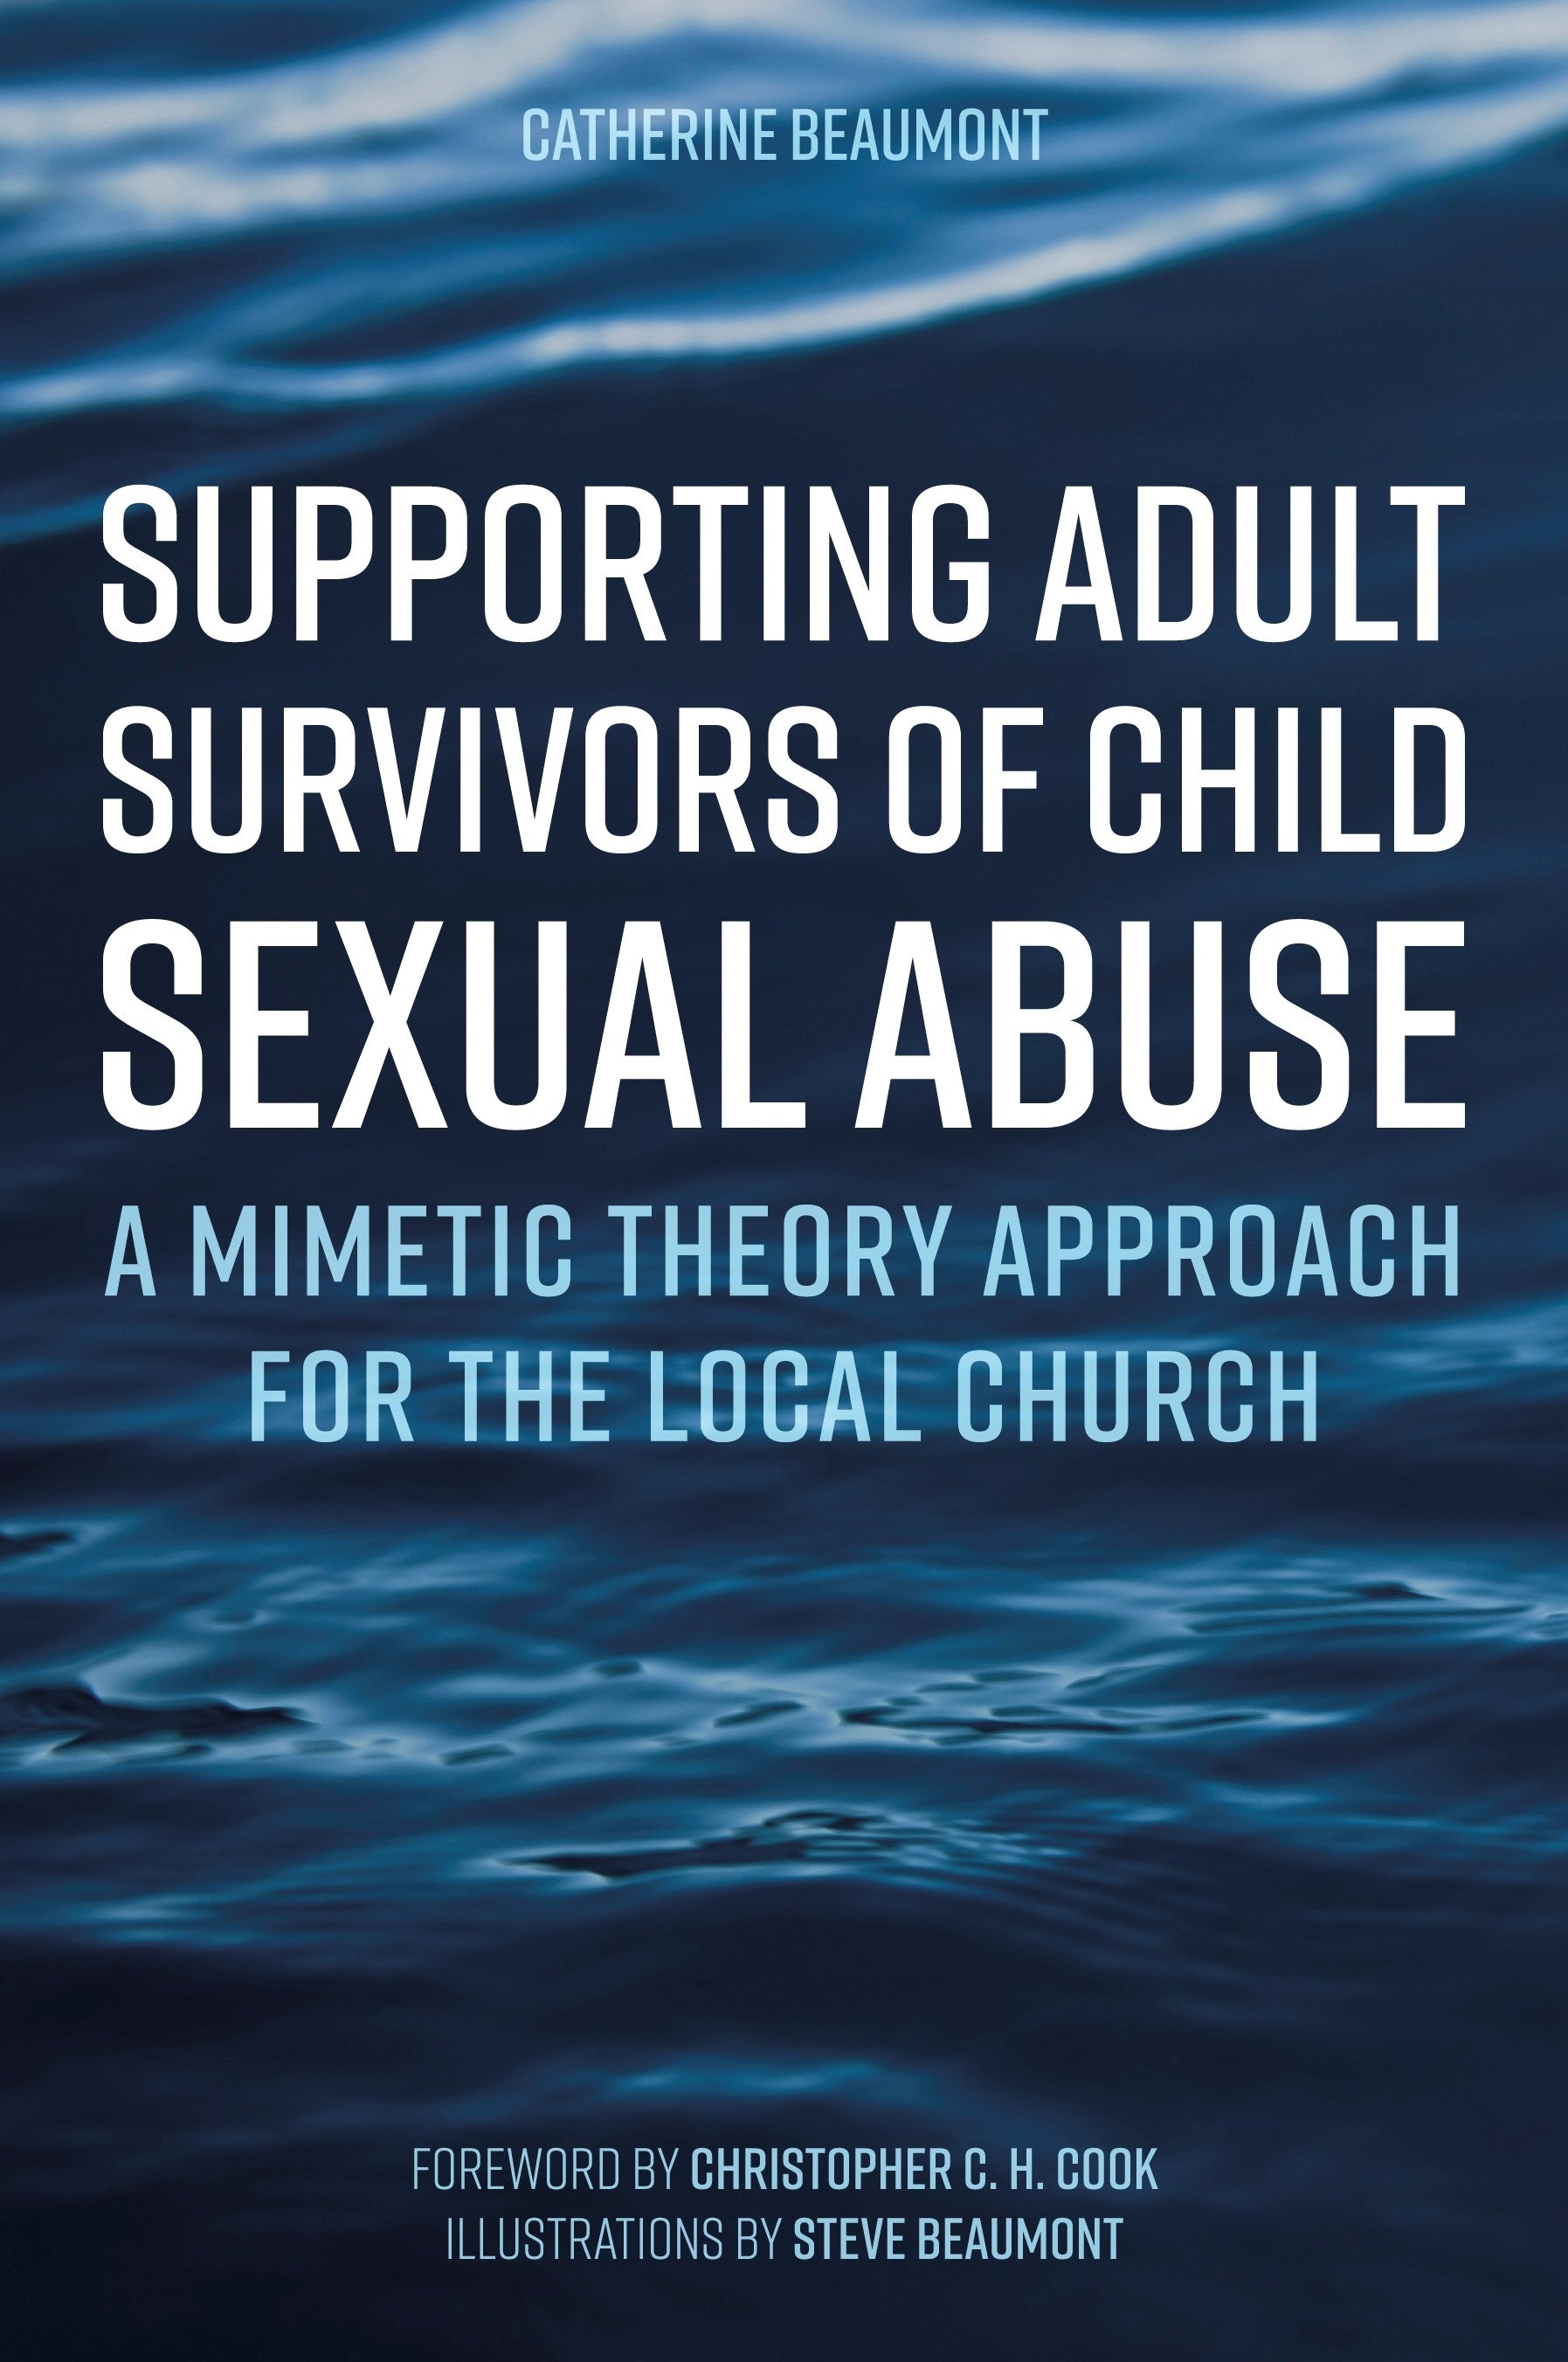 Supporting Adult Survivors of Child Sexual Abuse by Christopher C. H. Cook, Steve Beaumont, Catherine Beaumont